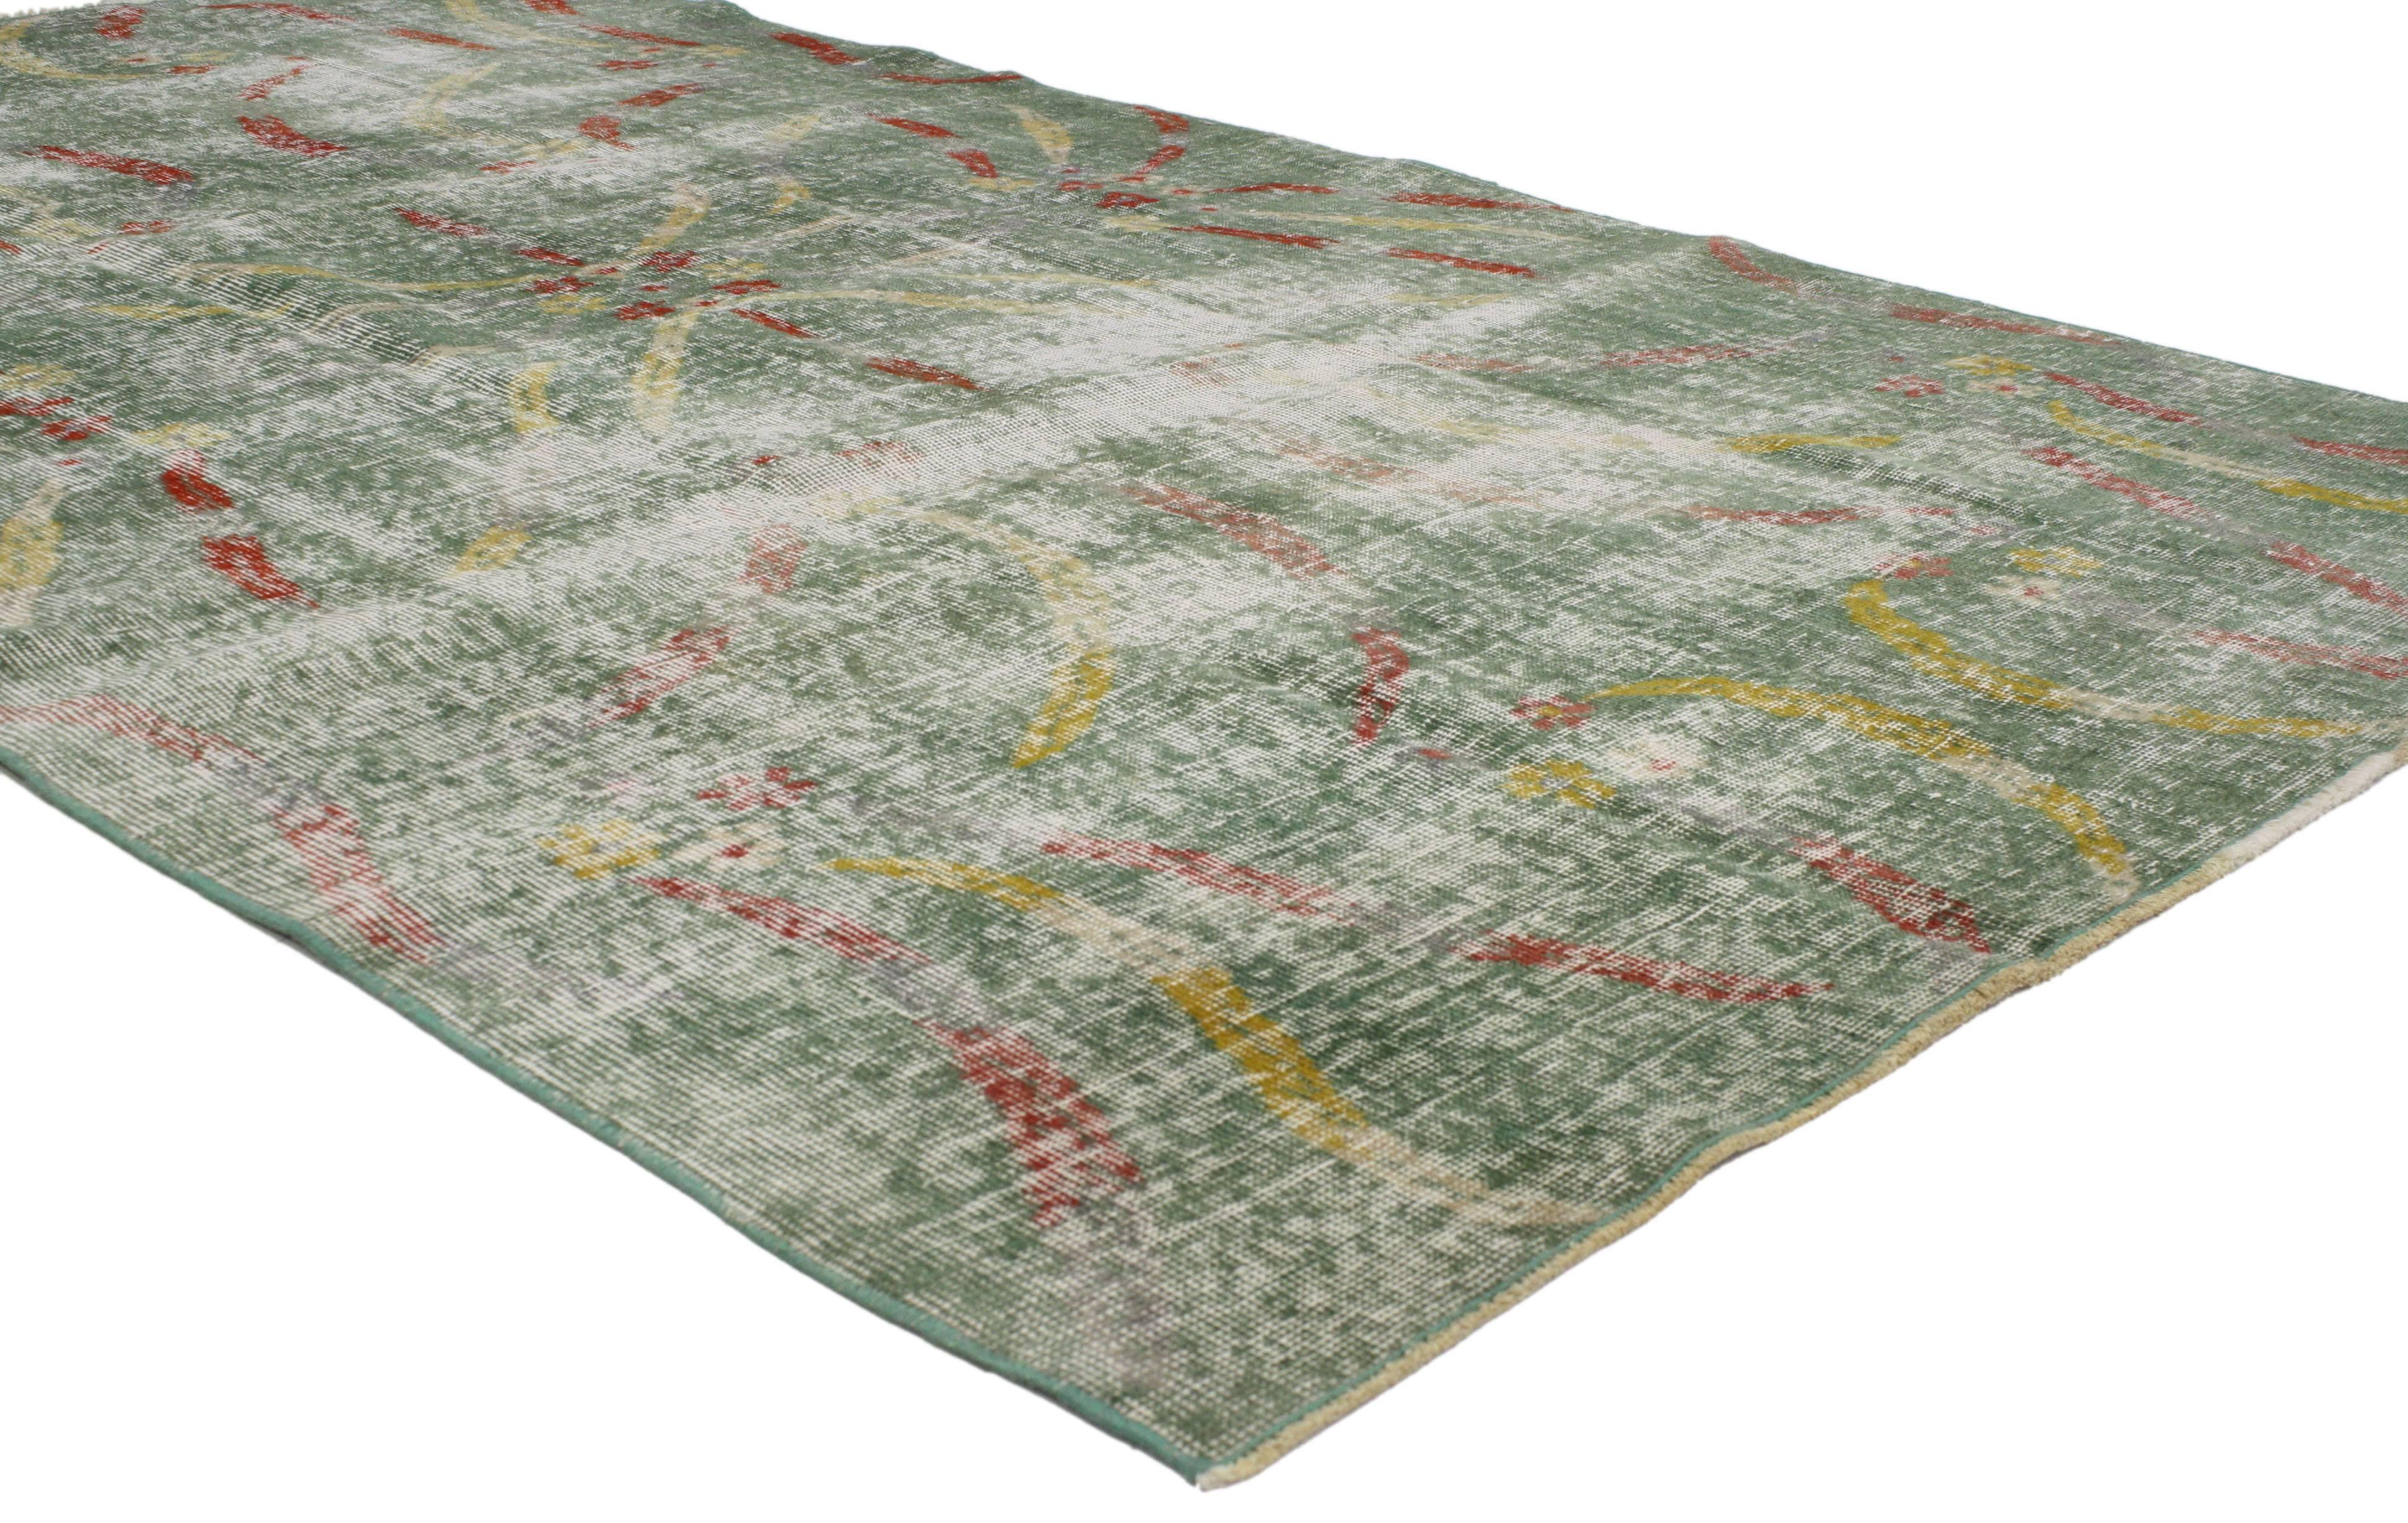 52191 Zeki Muren Distressed Vintage Turkish Sivas Rug with Art Deco Style. Highlighting some of the finest Art Deco and modern Industrial styles, this distressed vintage Turkish Sivas rug is influenced by its subtle beauty and inspired by Zeki